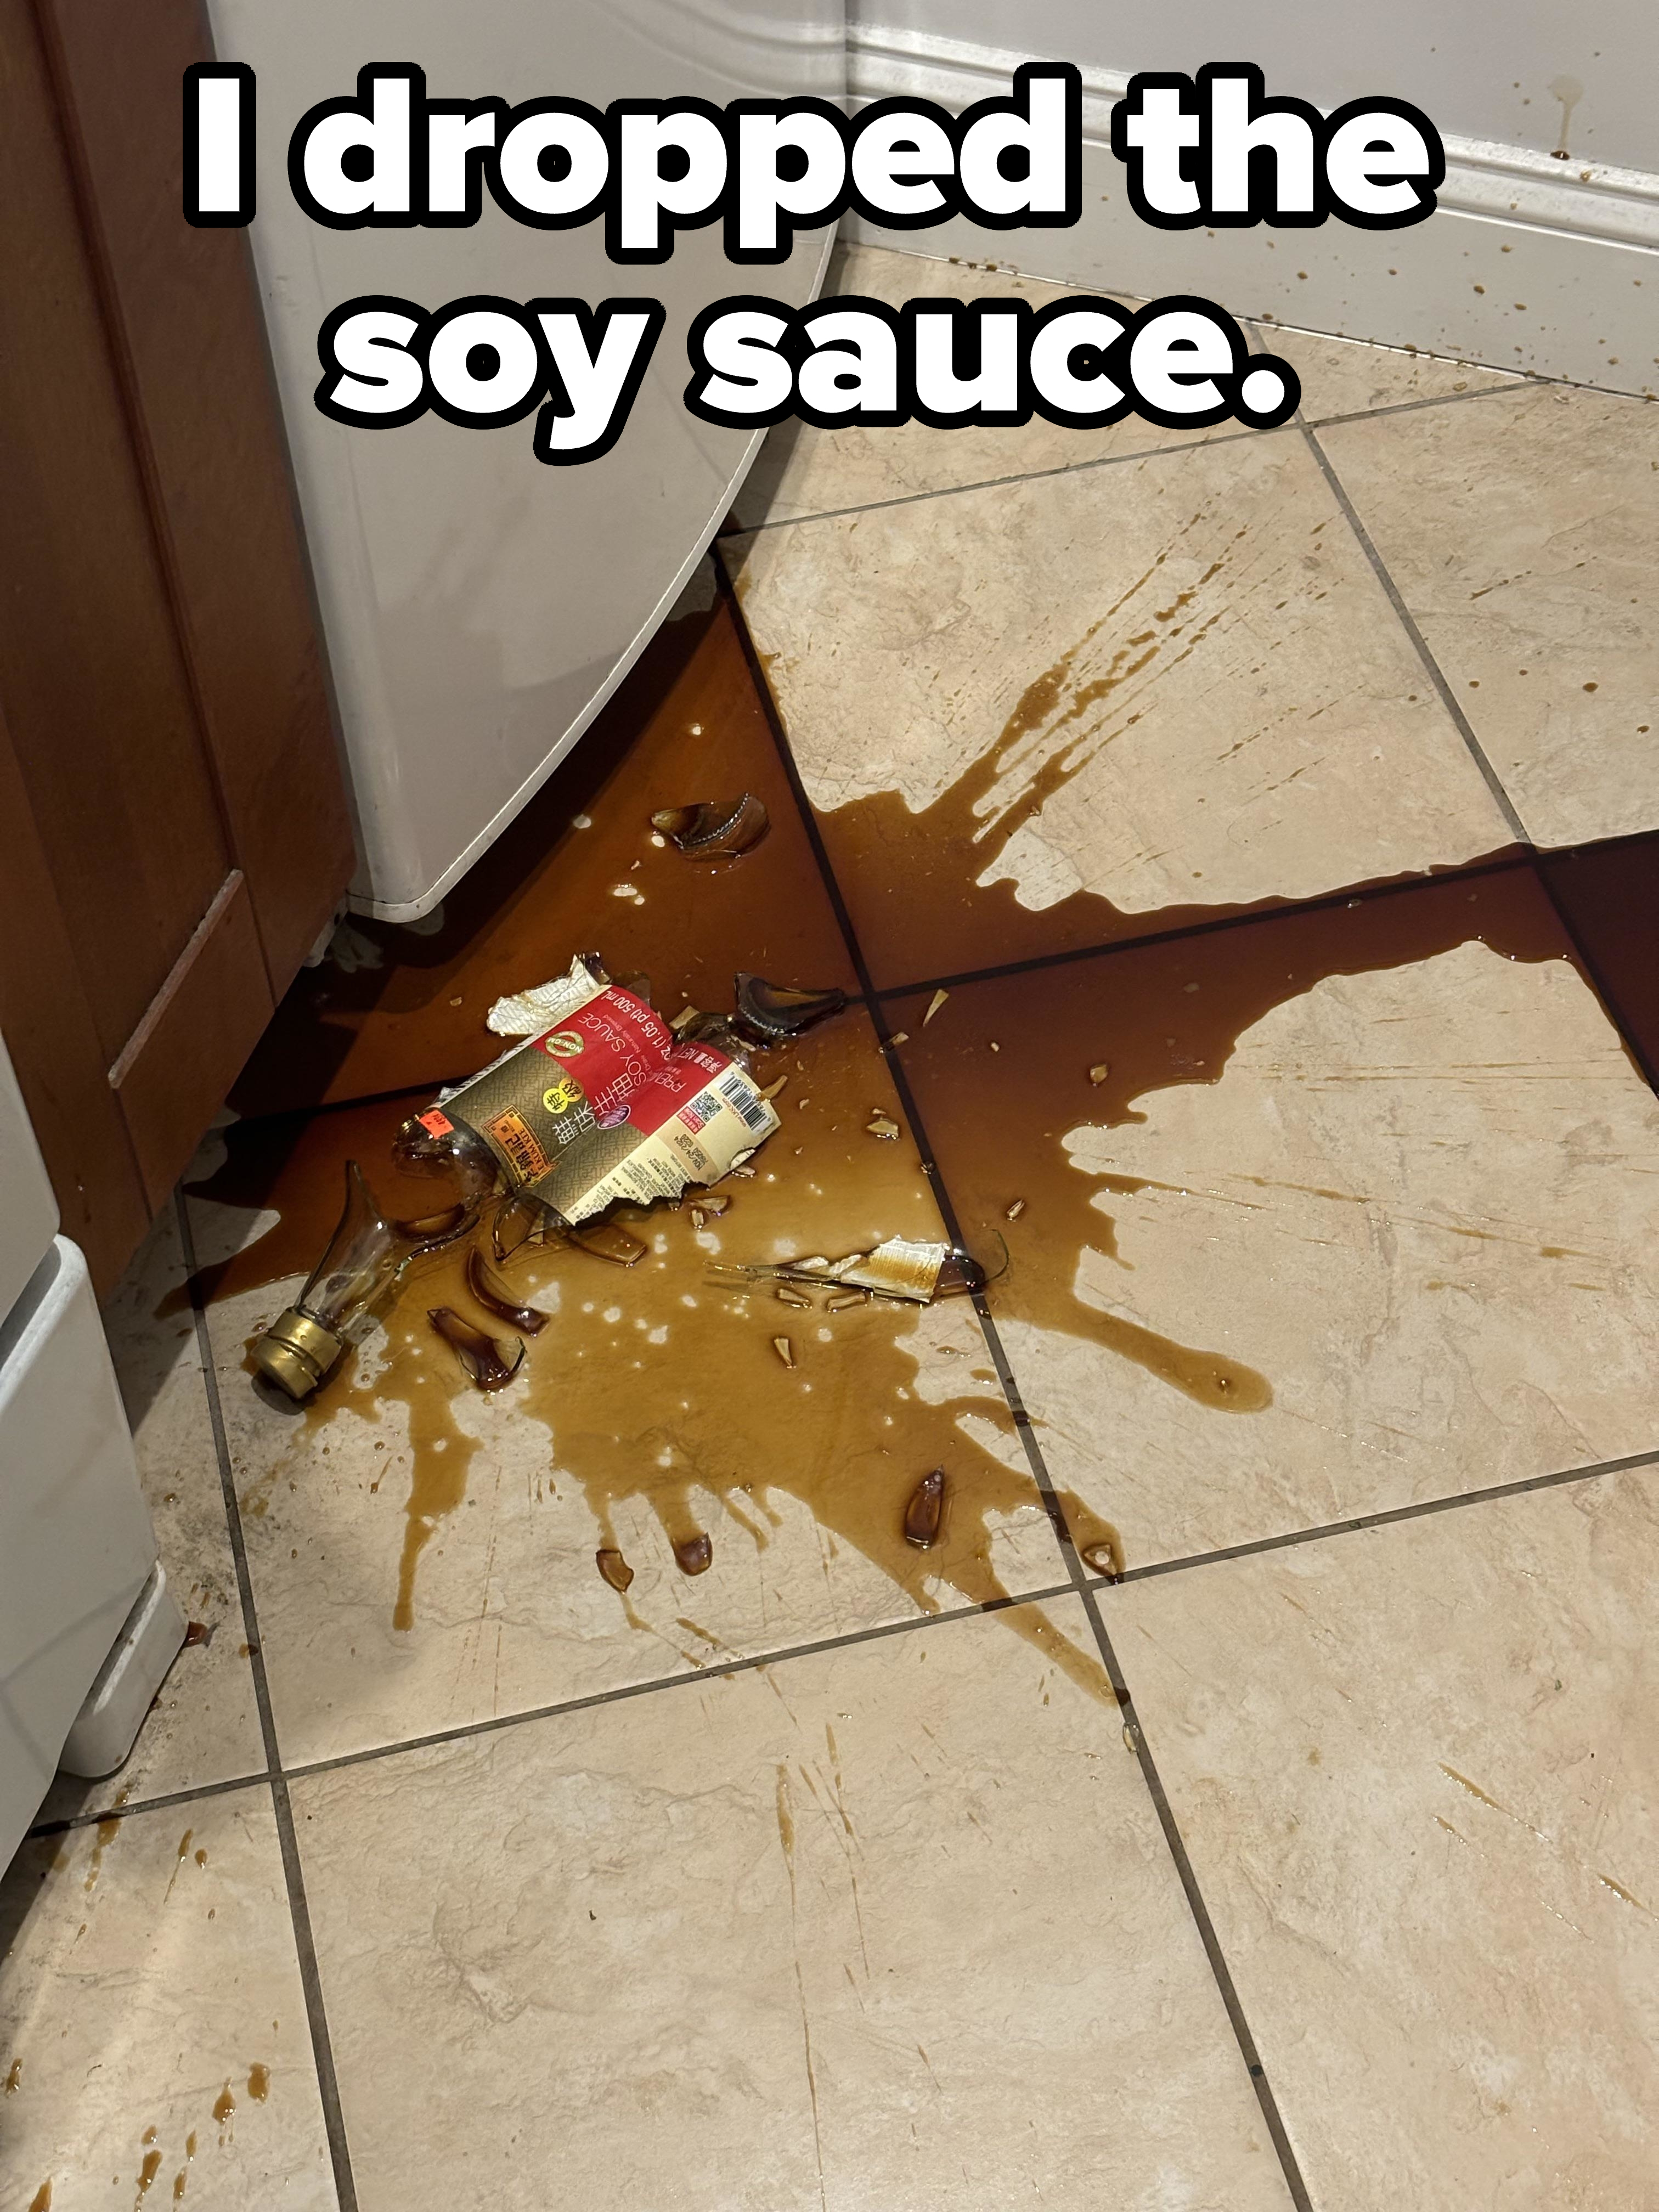 A broken bottle of soy sauce and its contents all over a kitchen floor